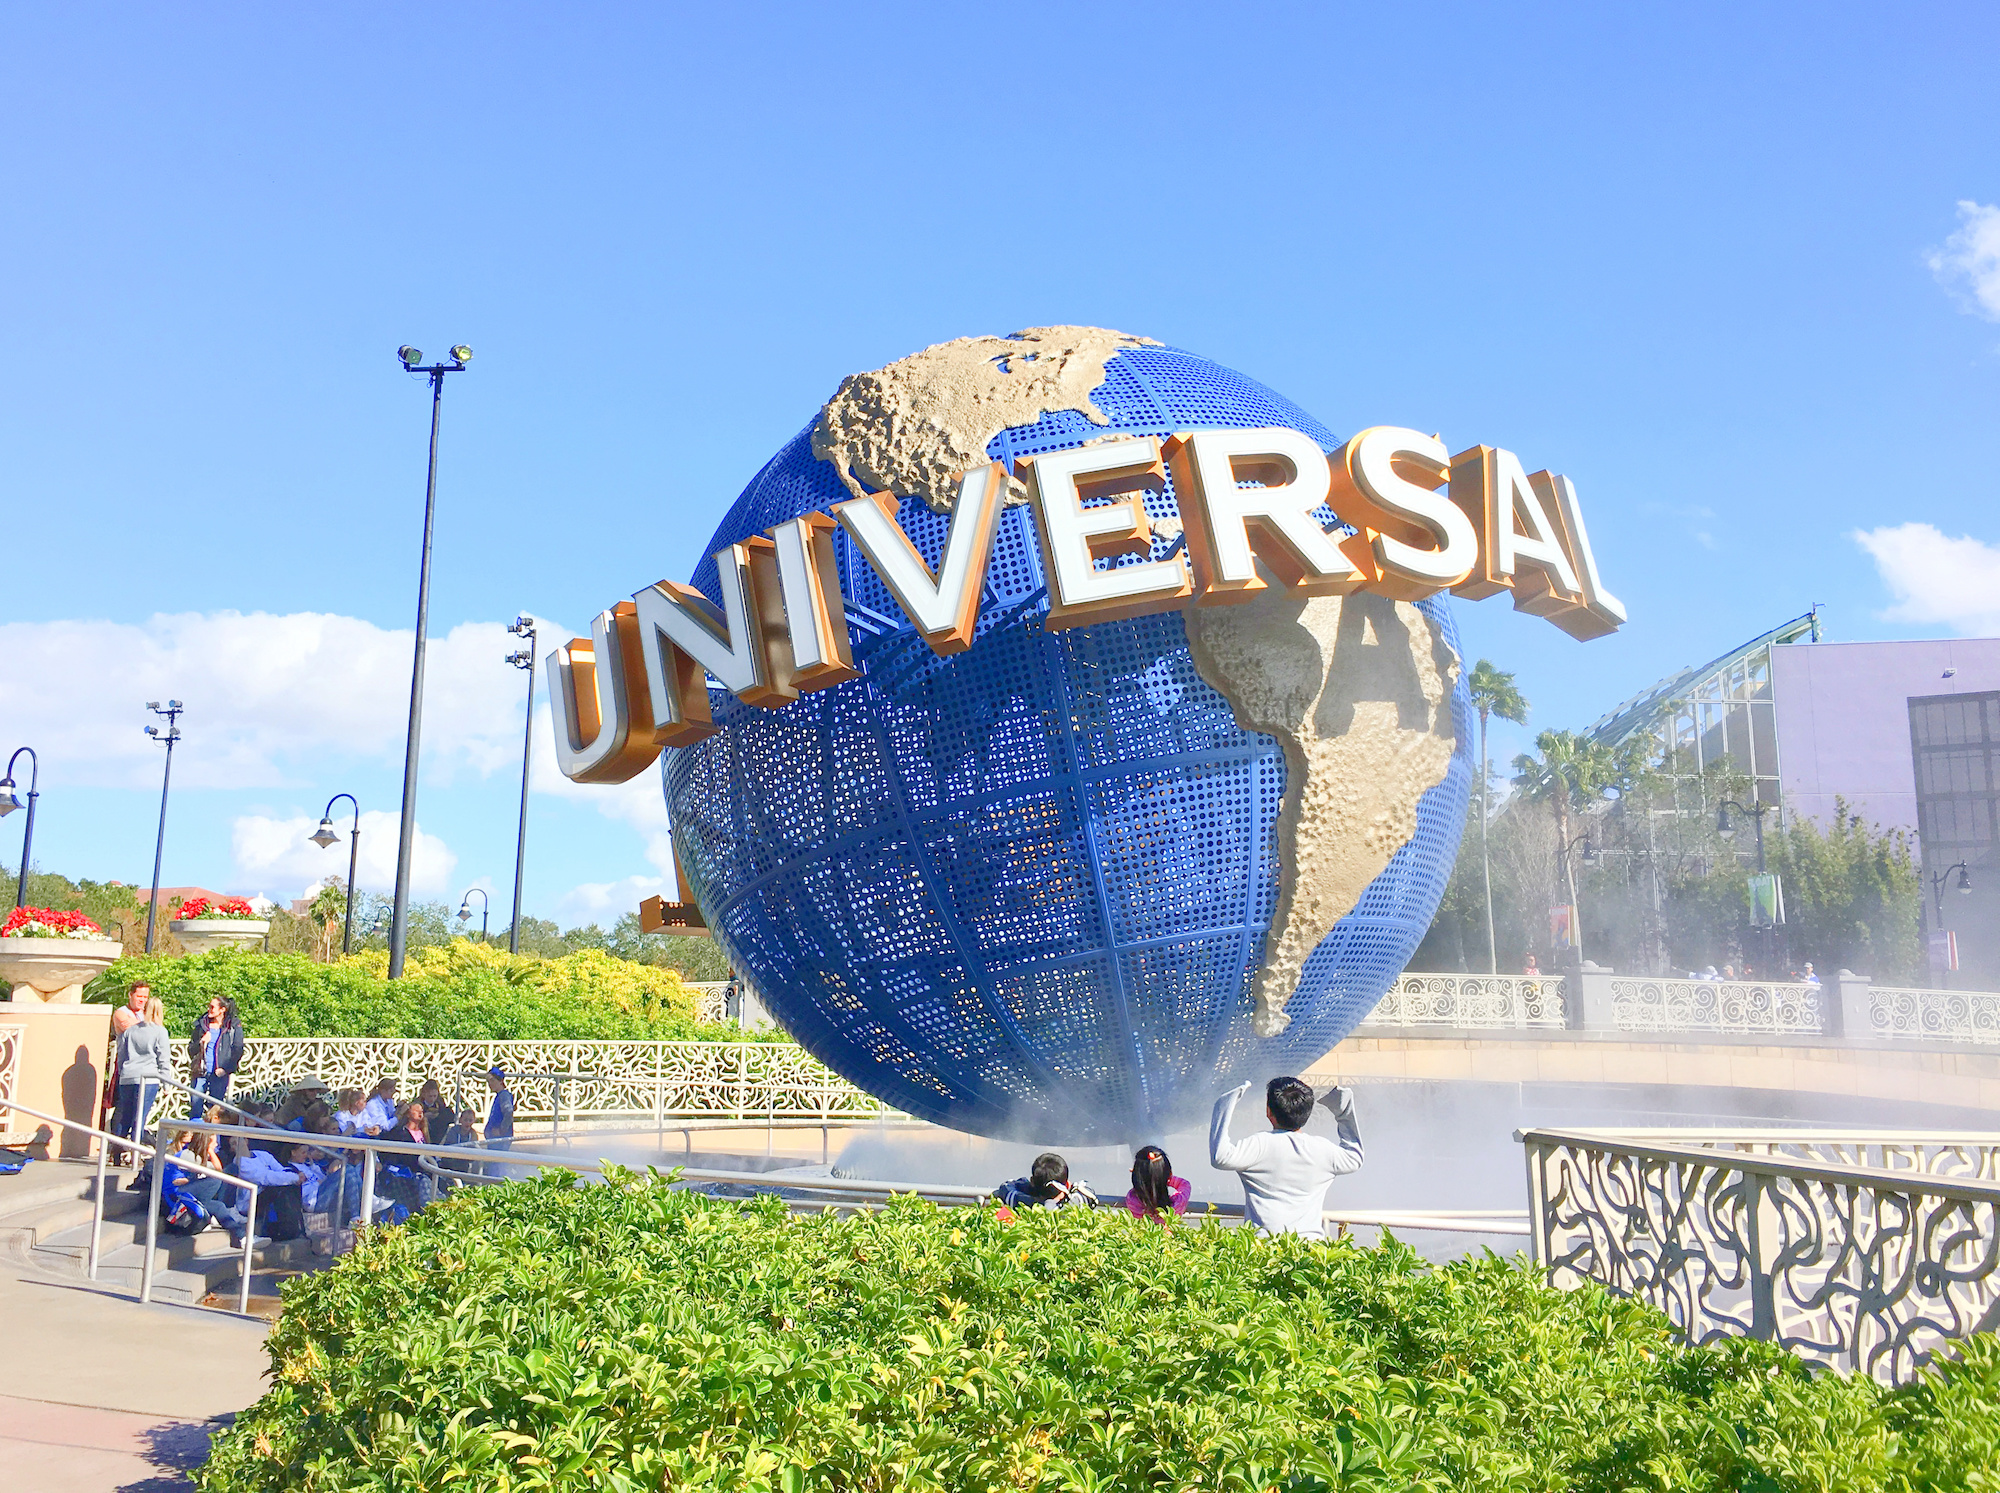 Universal Studios Thanksgiving 2022: Is It Open and How Crowded? - Wanderful World of Travel